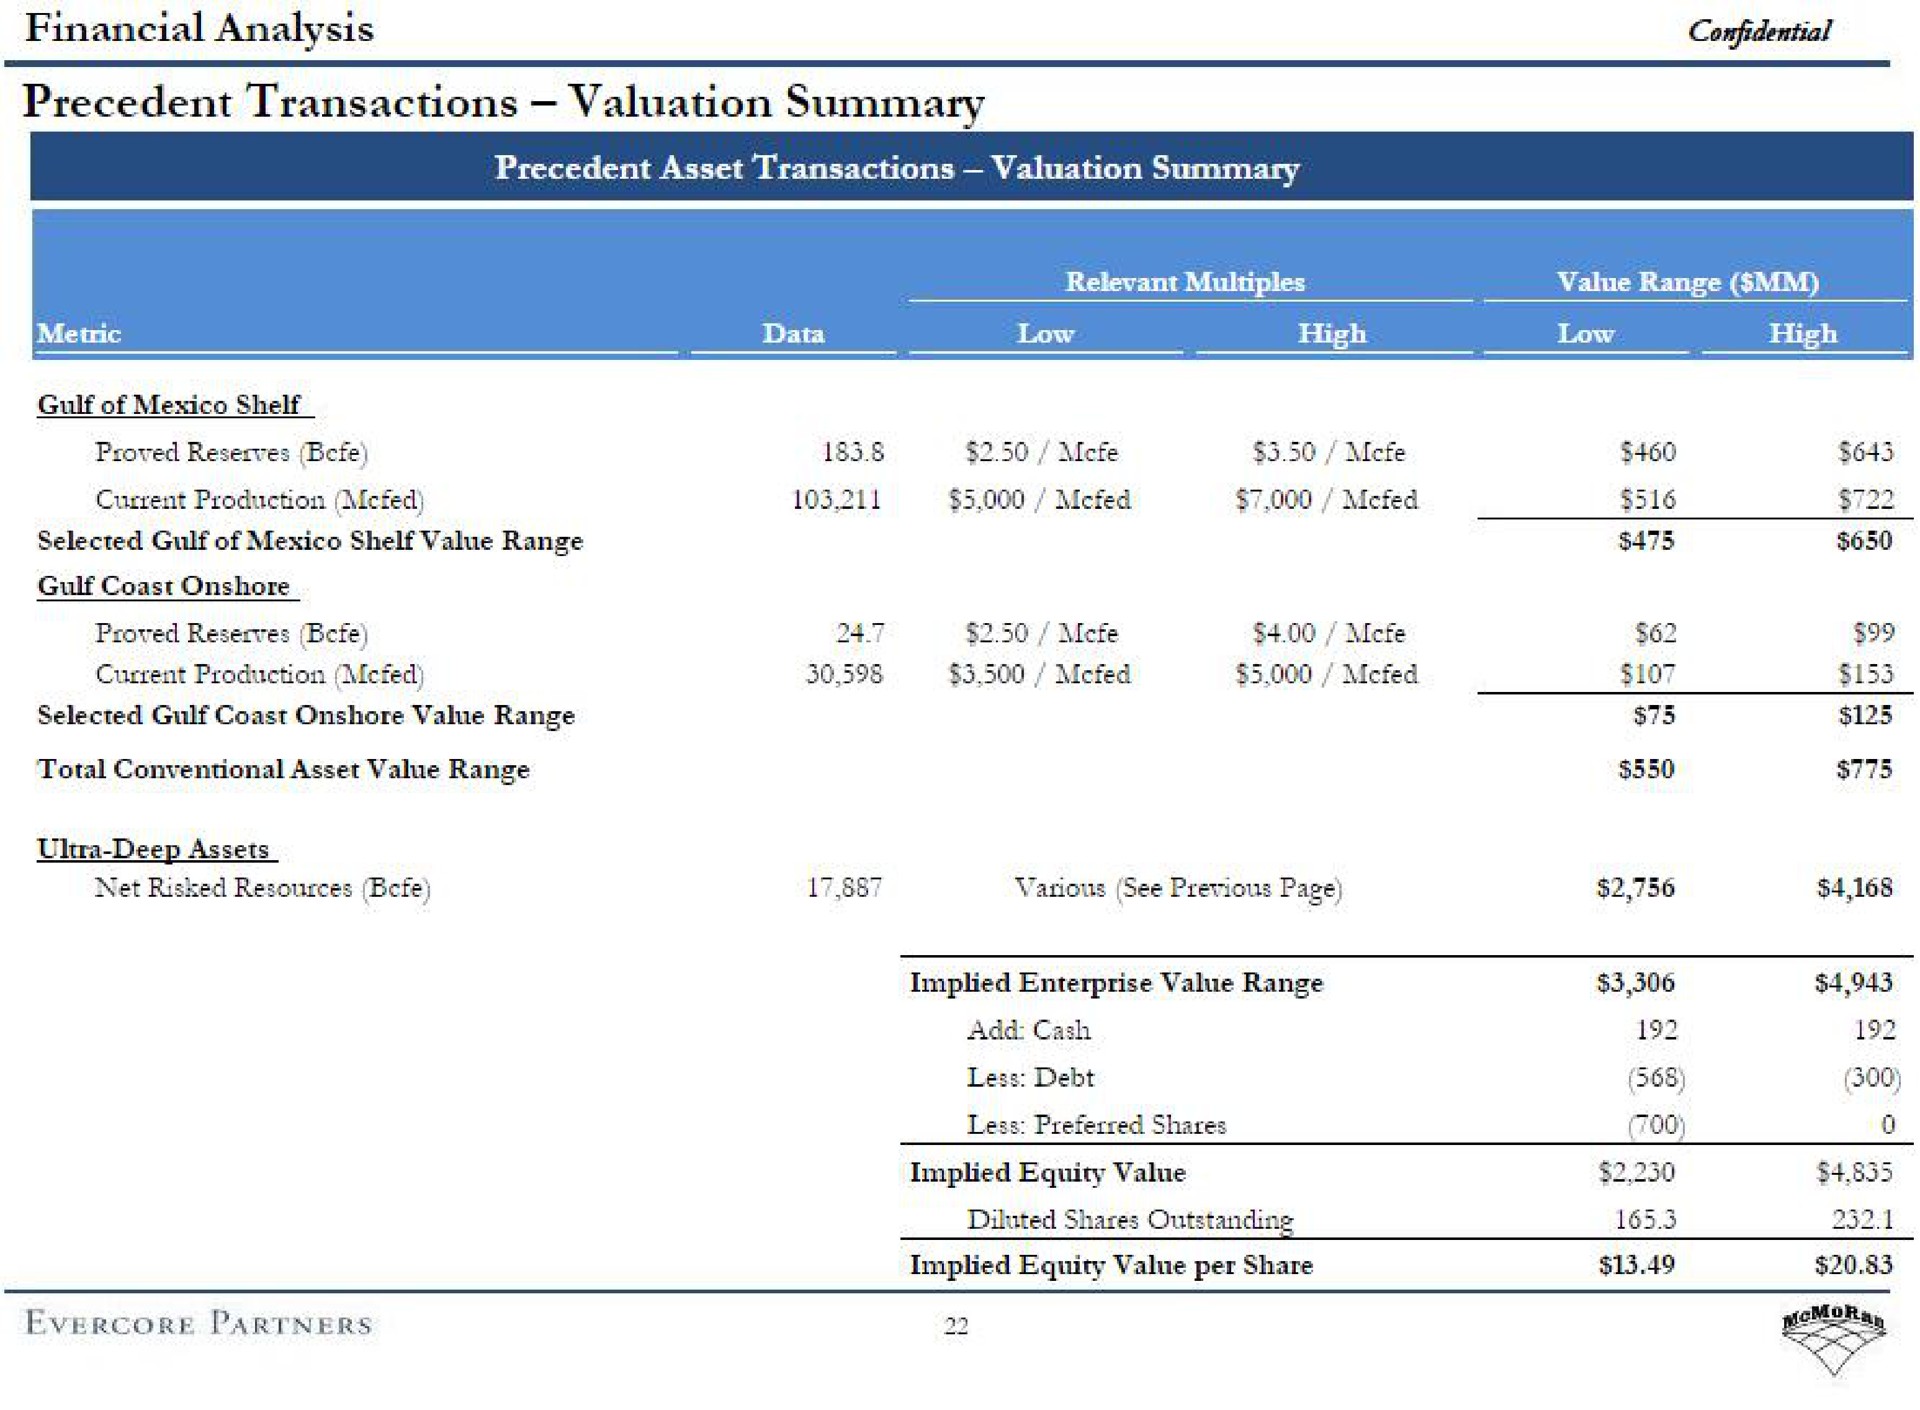 financial analysis confidential precedent transactions valuation summary relevant multiples value range partners | Evercore